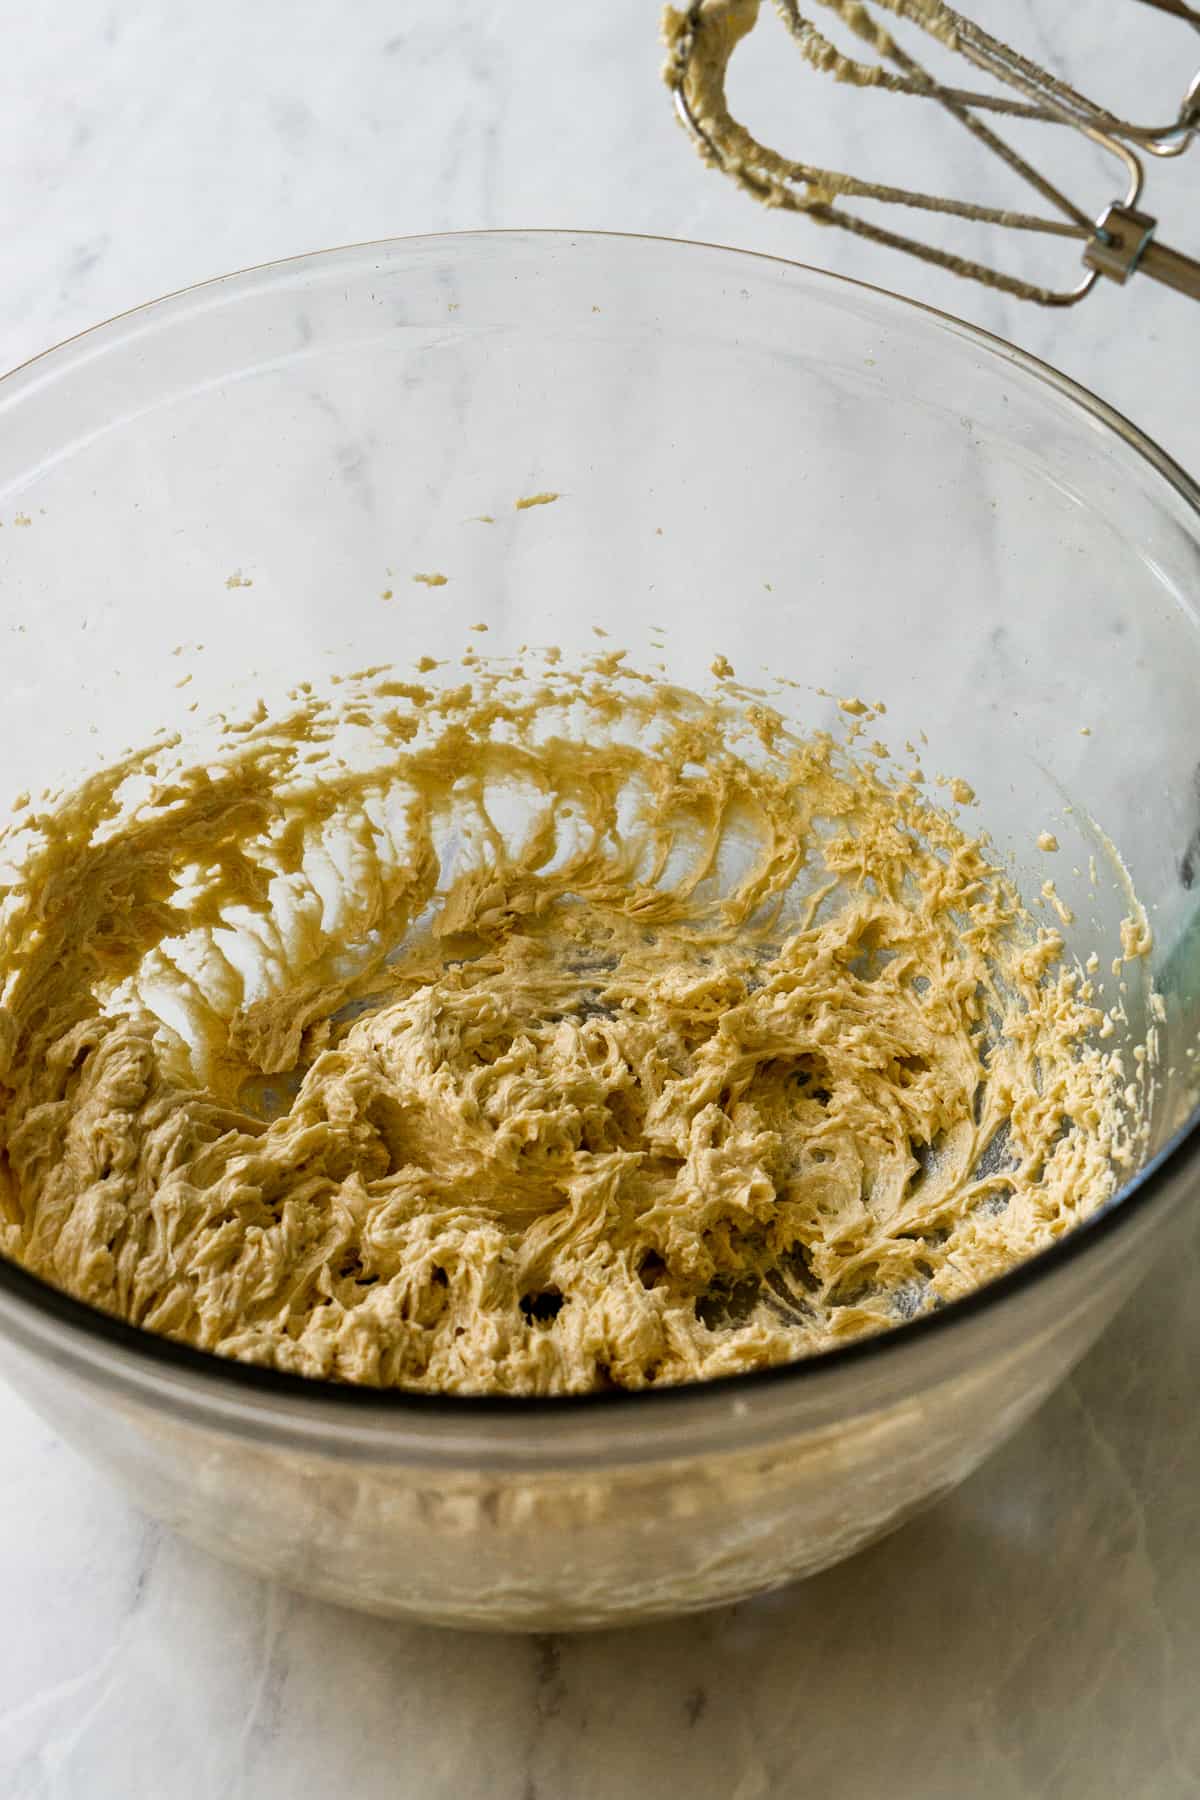 Wet ingredients for cookie base creamed together using a hand mixer in a glass bowl.